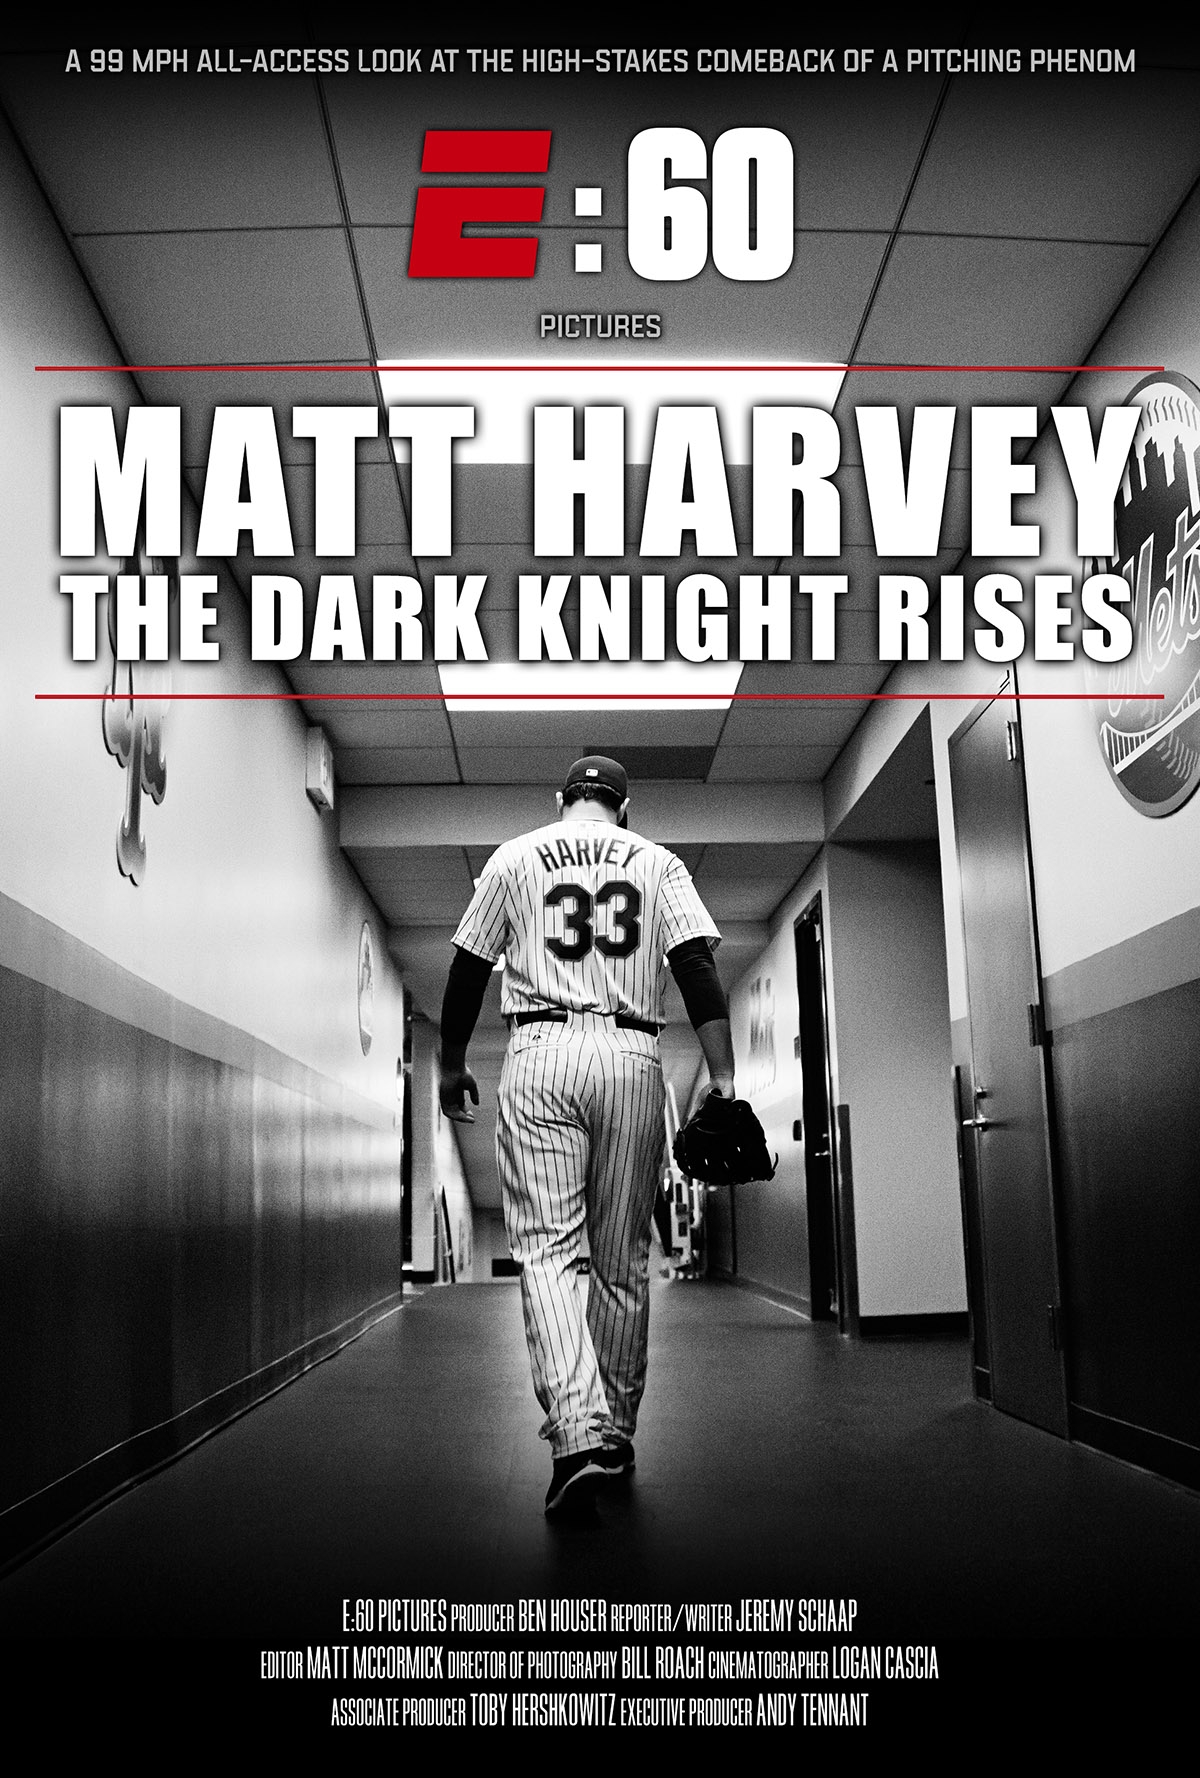 Mets pitcher Matt Harvey to appear in ESPN: The Magazine's The